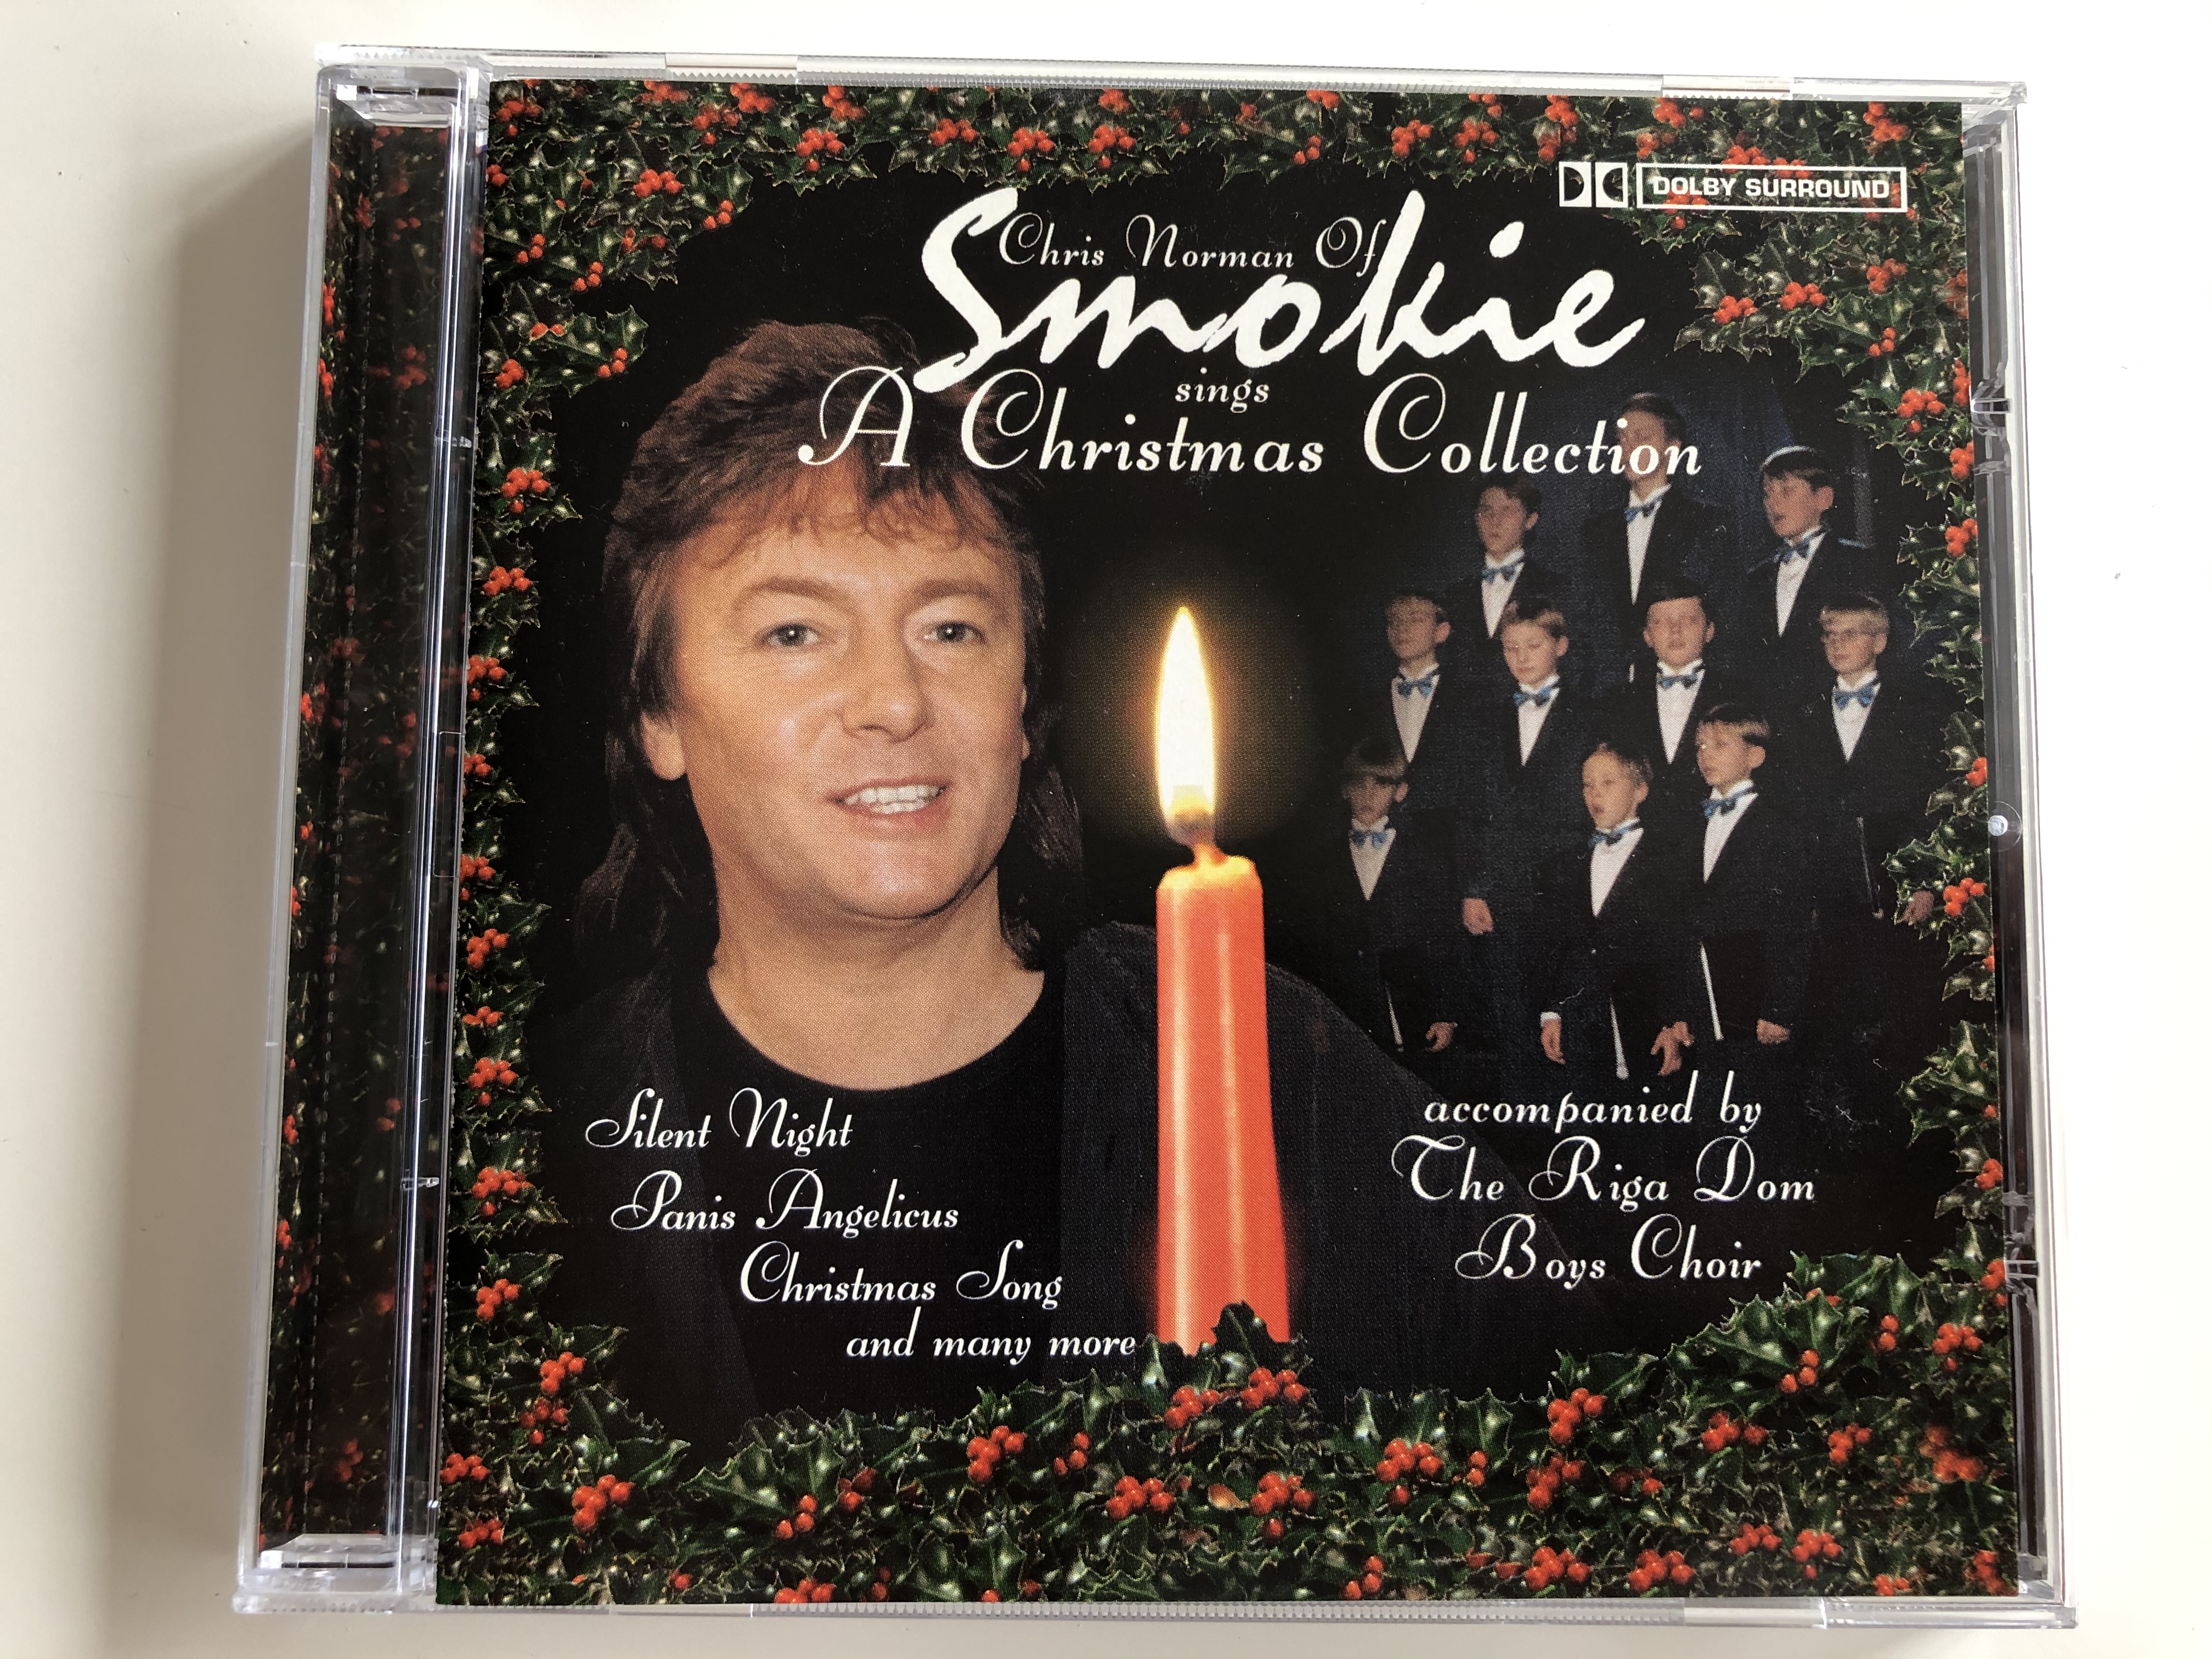 chris-norman-of-smokie-sings-a-christmas-collection-silent-night-panis-angelicus-christmas-song-and-many-more-accompanied-by-the-riga-dom-boys-choir-going-for-a-song-audio-cd-gfs994-1-.jpg